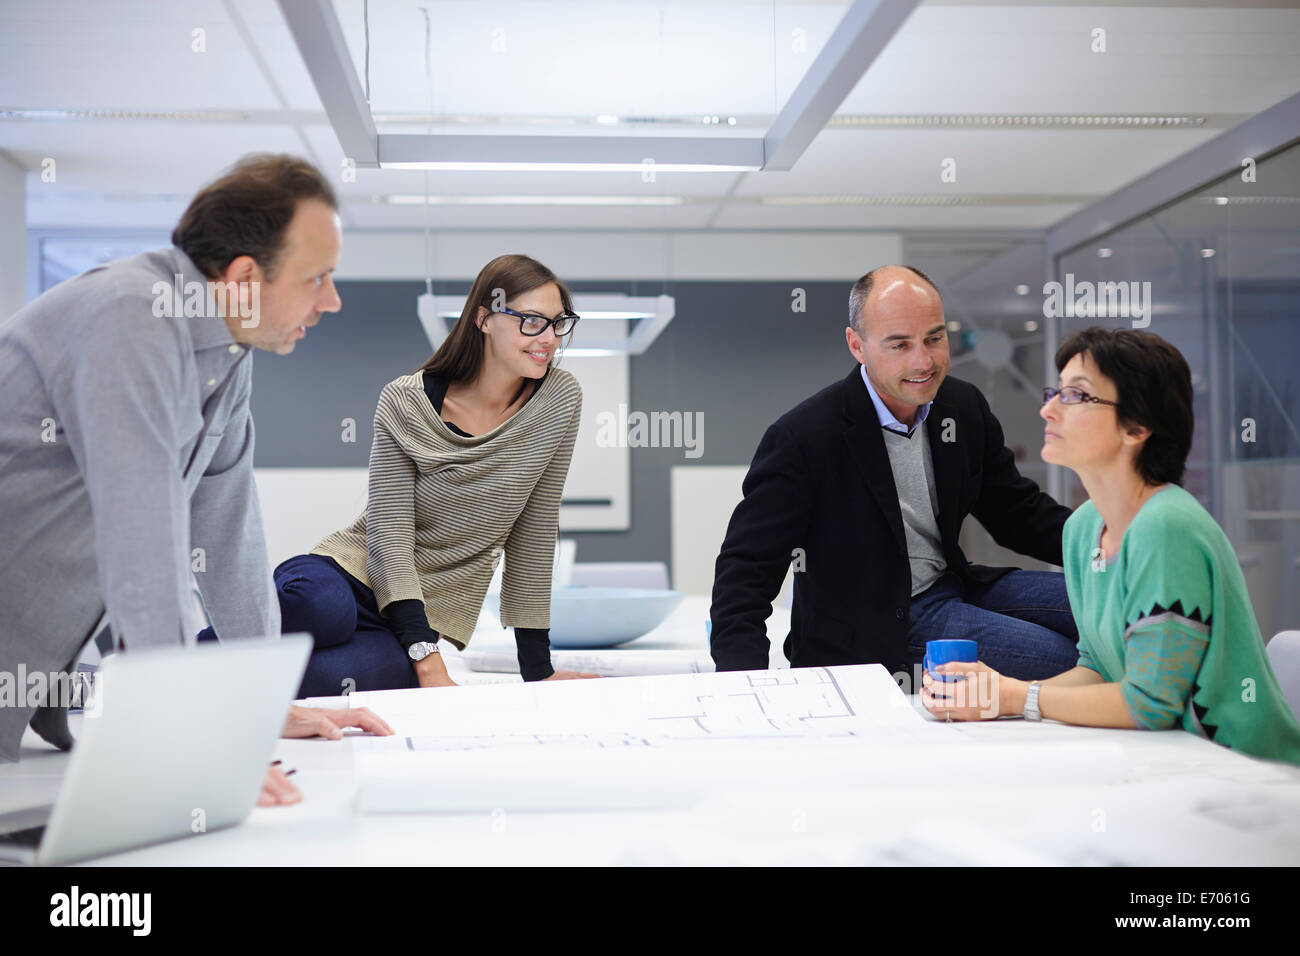 Group of business people looking at plans Stock Photo